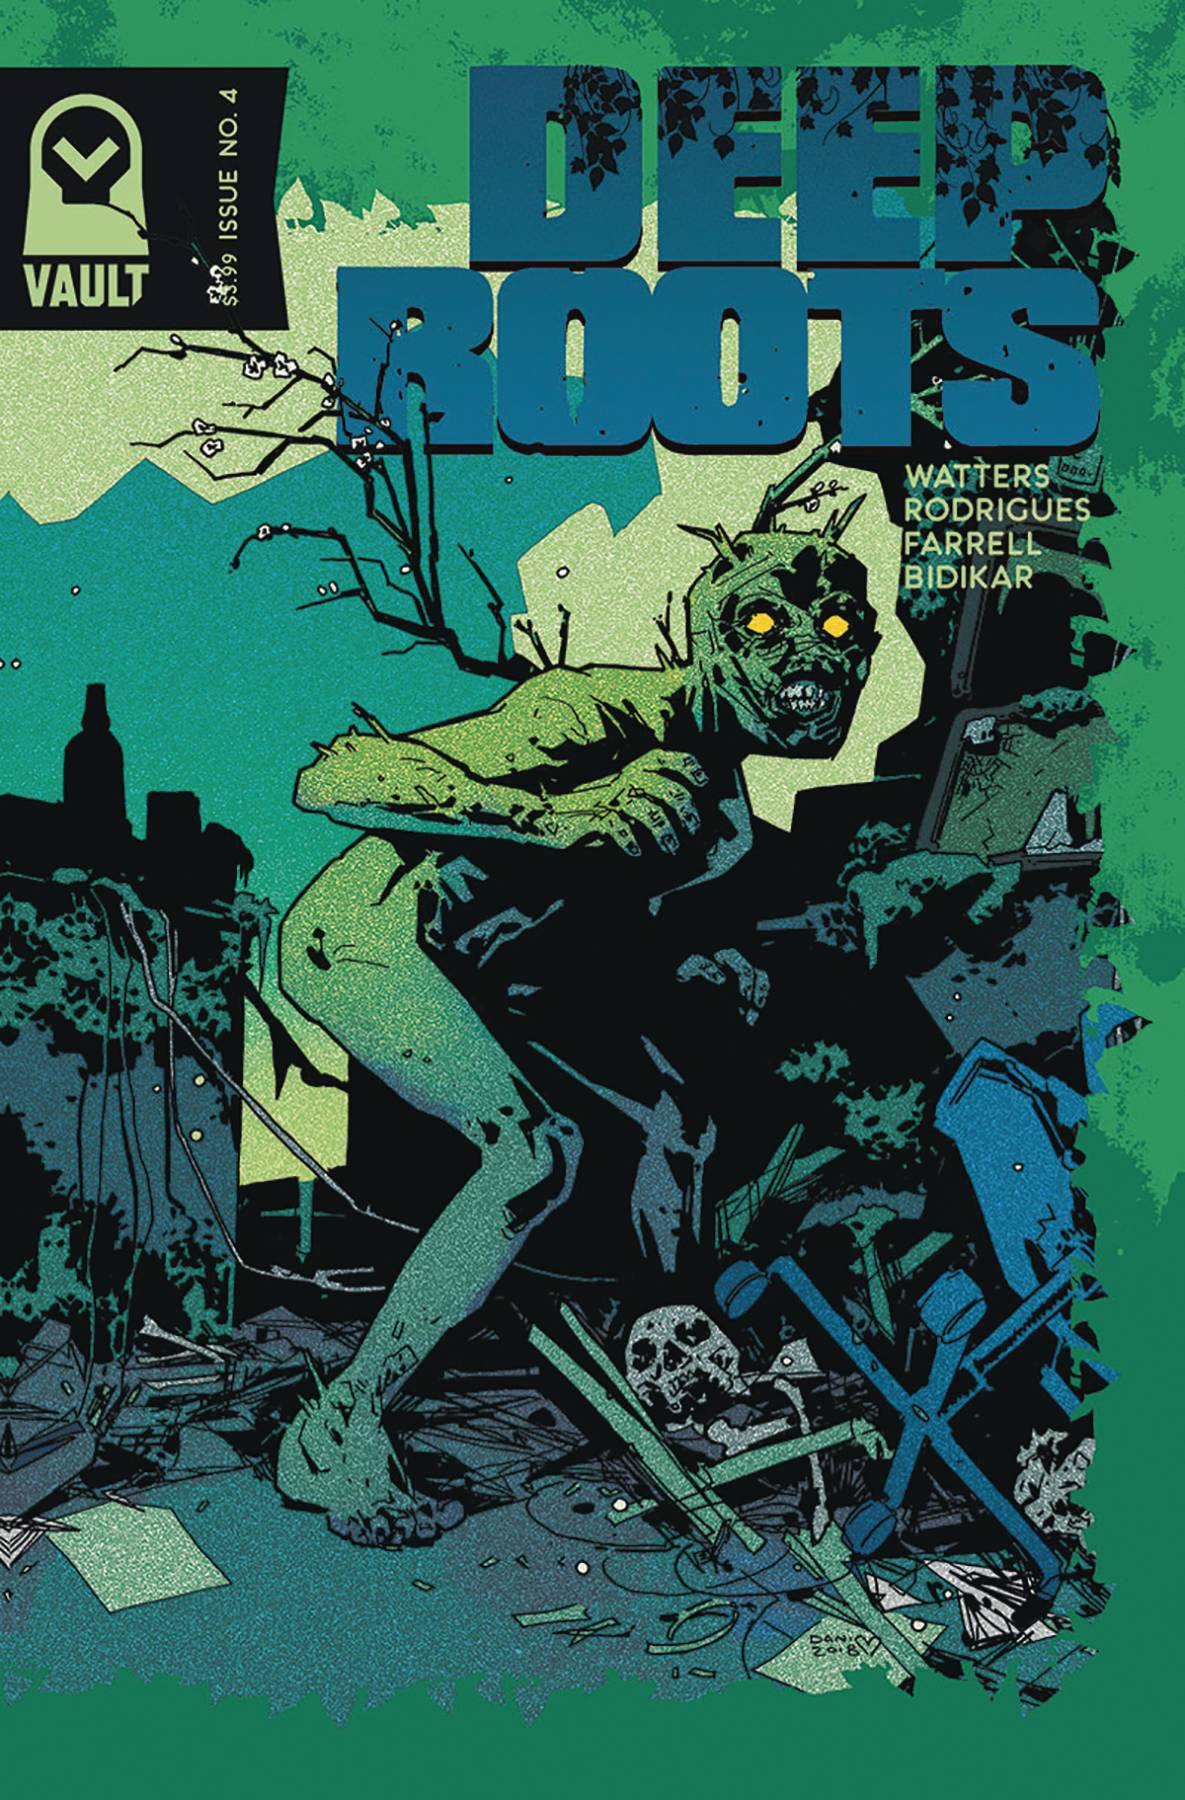 Deep Roots #4 Cover A Strips (Mature)